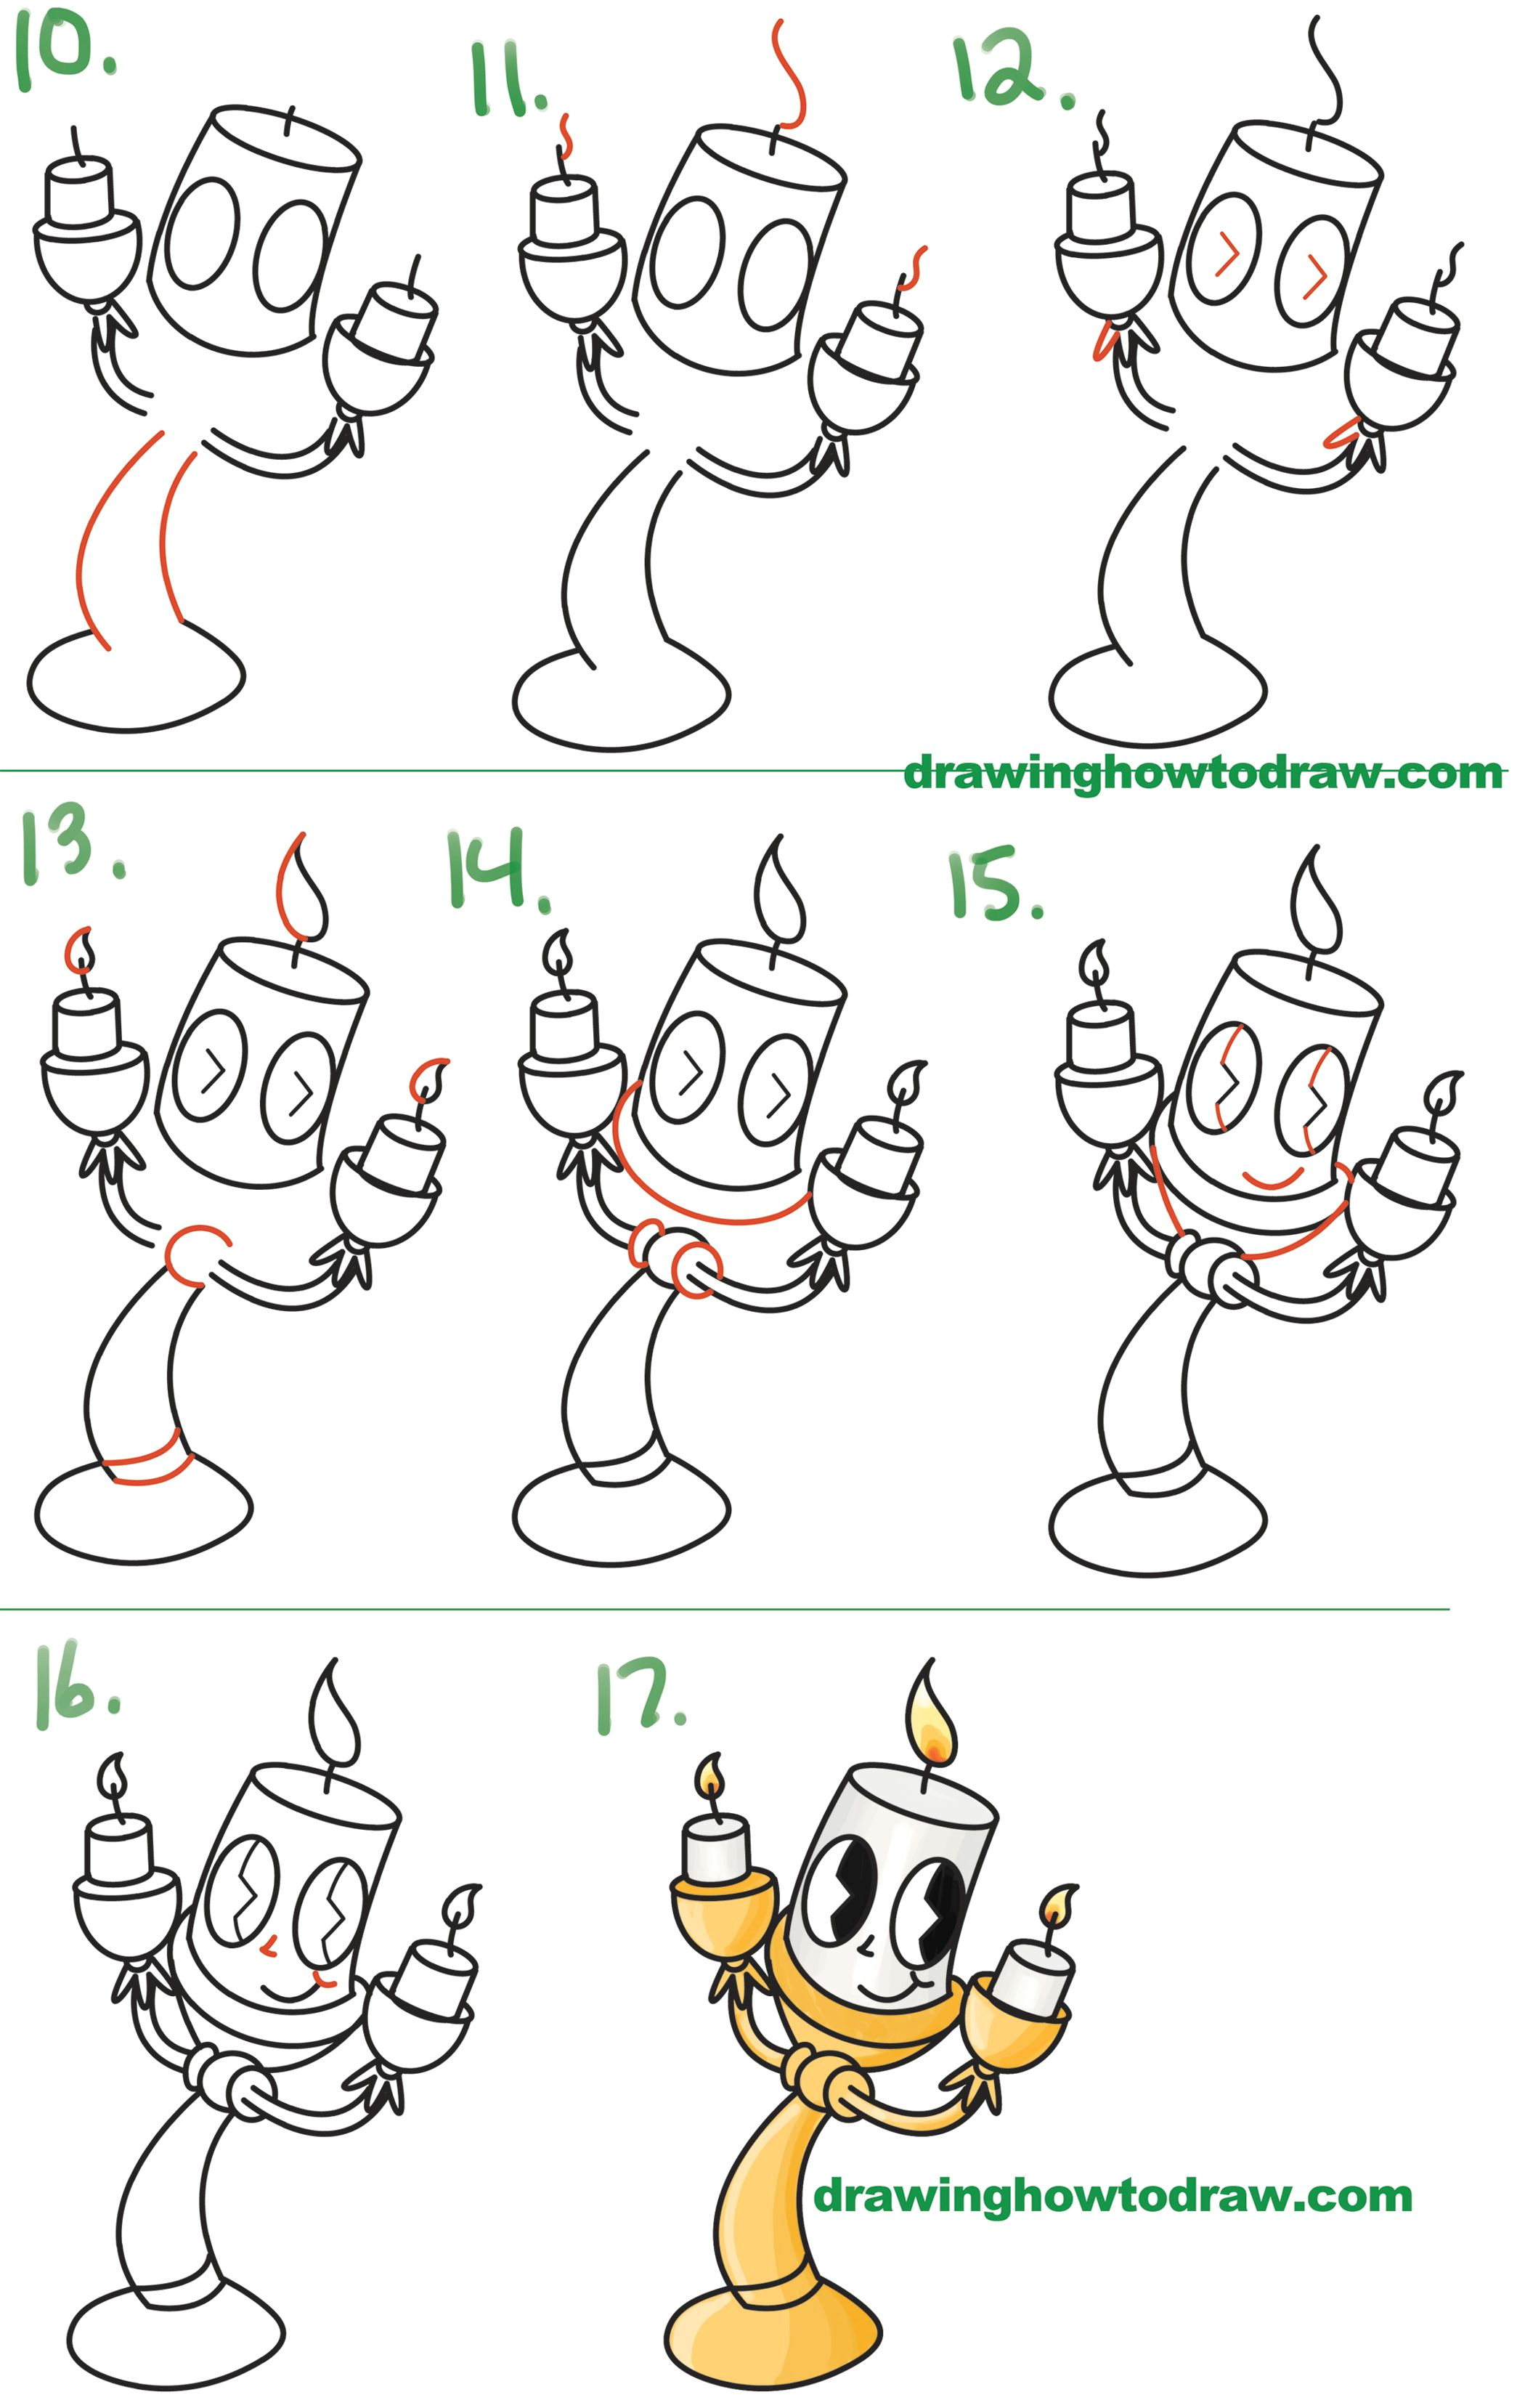 Easy Drawings and Steps How to Draw Lumiere Cute Kawaii Chibi From Beauty and the Beast